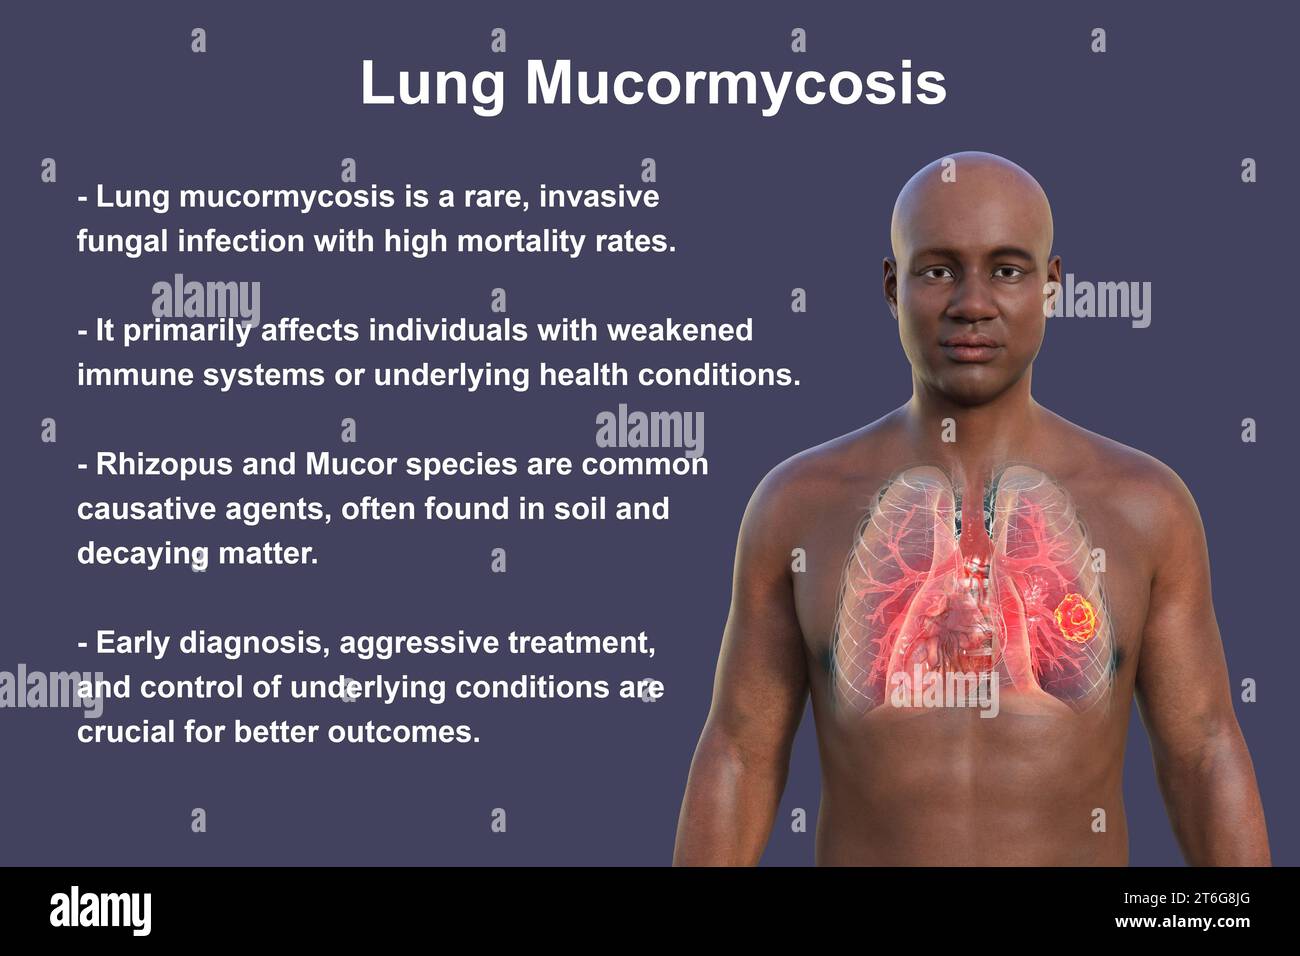 A 3D photorealistic illustration of the upper half part of an African man with transparent skin, revealing a lung mucormycosis lesion Stock Photo